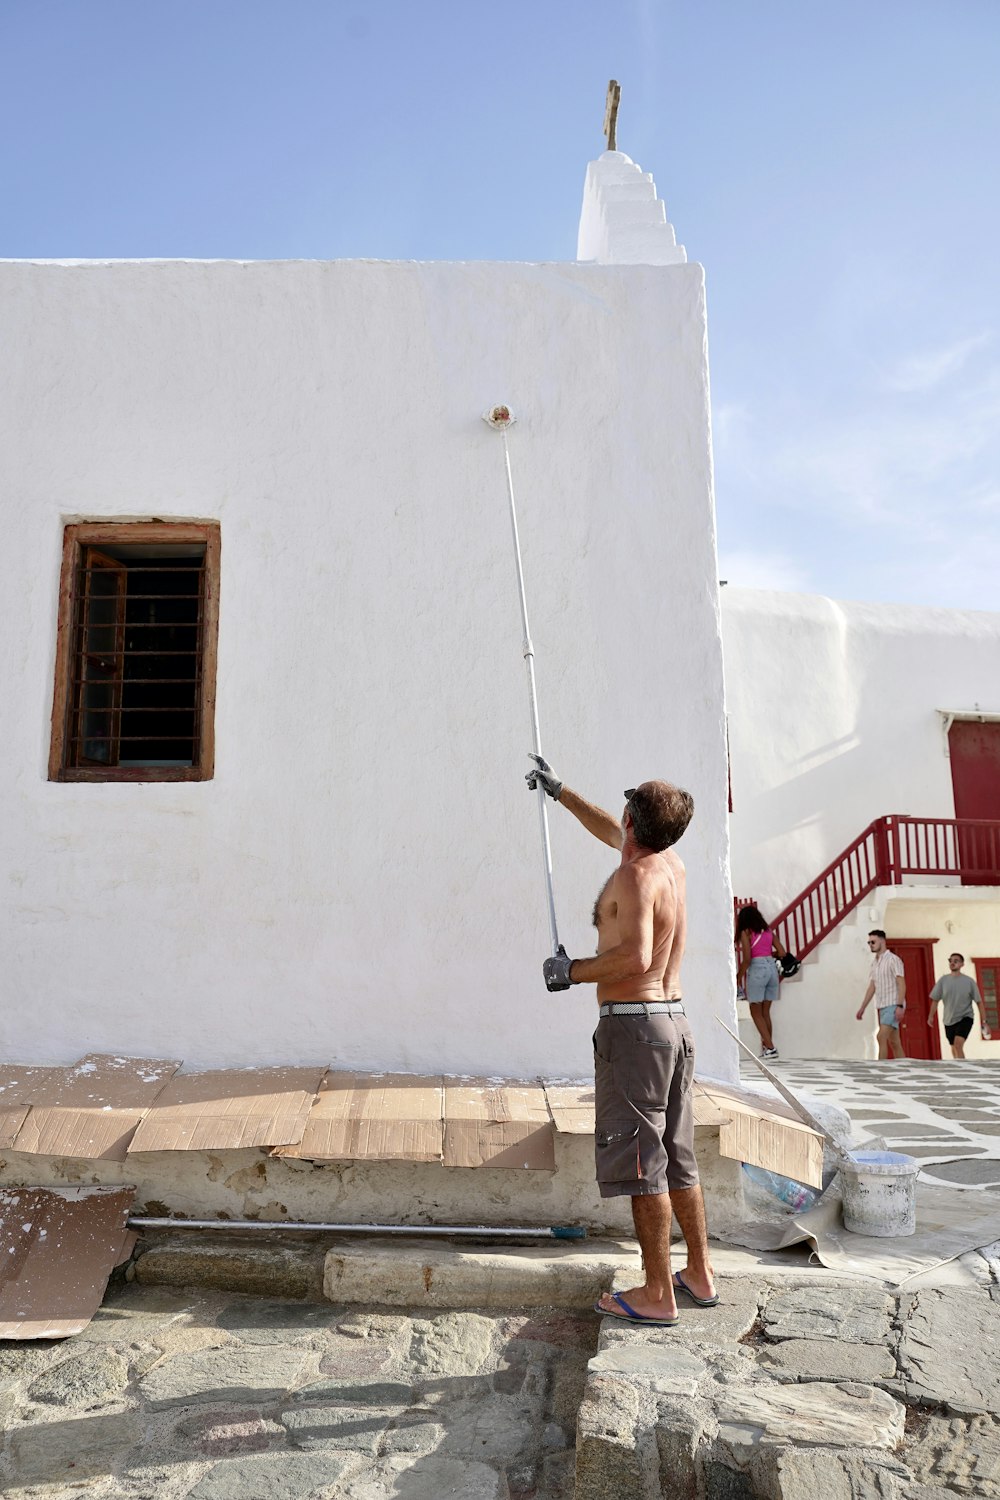 a man is painting the side of a white building